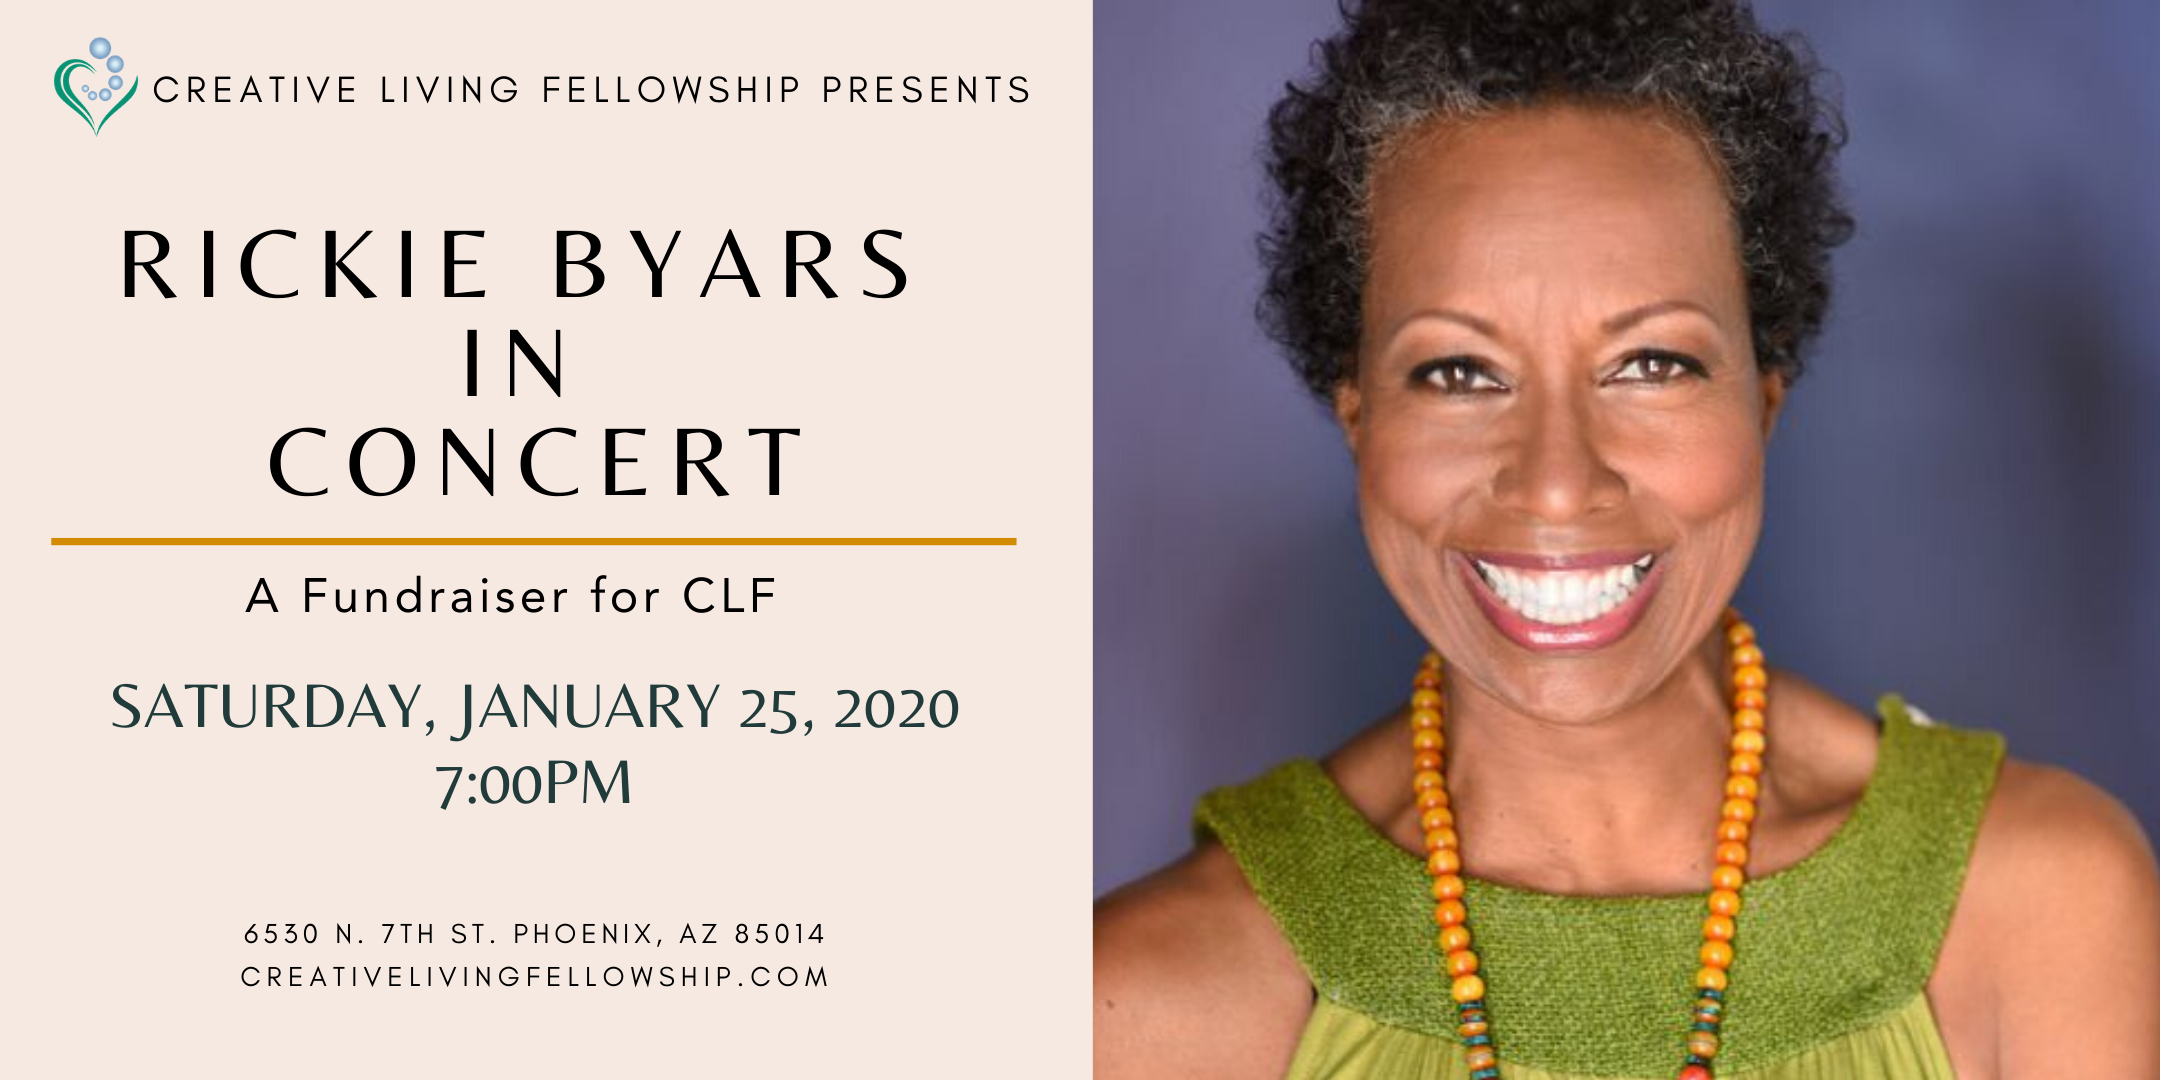 Rickie Byars in Concert - A Fundraiser for Creative Living Fellowship